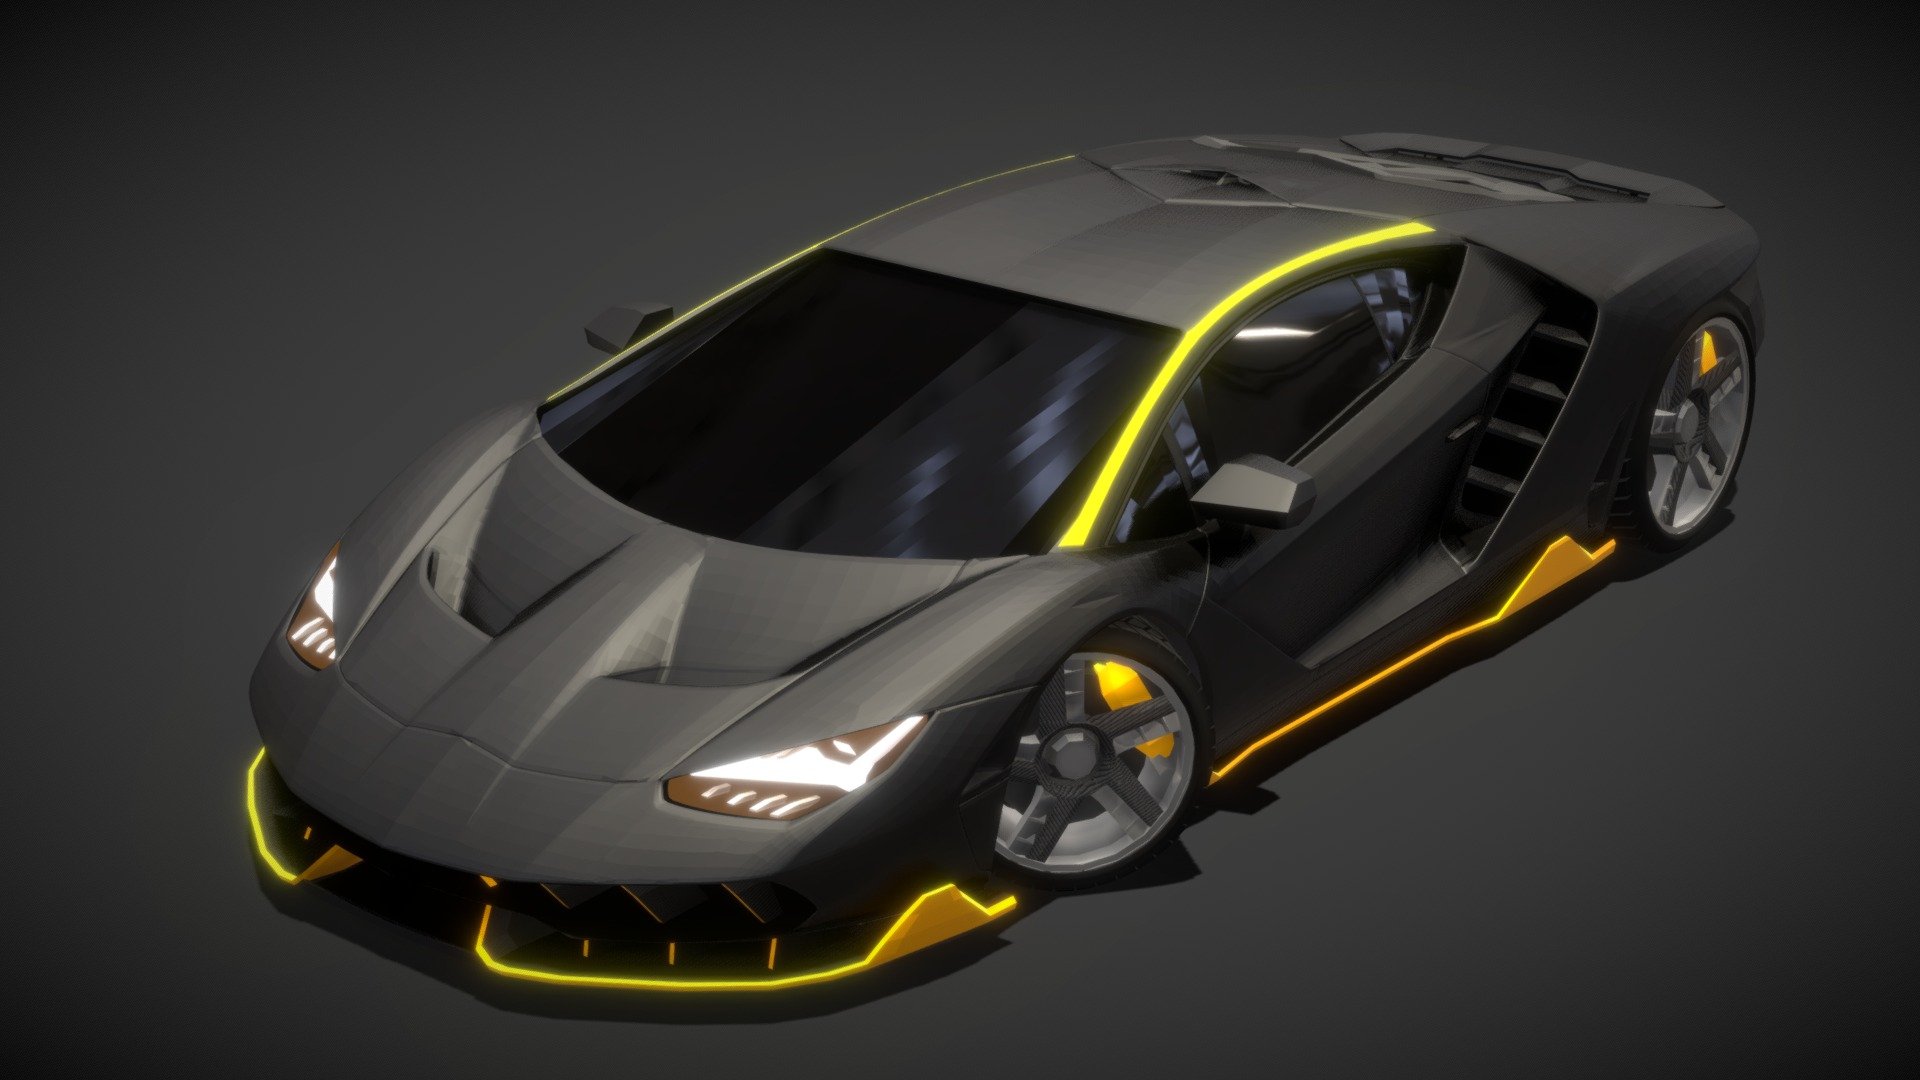 Lamborghini Centenario LP 770-4 (Revamp)

This is my Lamborghini Centenario 3D car model that I created two years ago My old Centenario 3d Model. However, upon realizing it had several mistakes, I was determined to rectify them and enhance its overall quality. With careful attention and diligent effort, I diligently worked on the necessary improvements, resulting in a significantly improved version of the model

Let me know your thoughts in comments down bellow 🔽

Thank you!
Modeled by: Mowahed3D - Lamborghini Centenario LP 770-4 (Revamp) - Buy Royalty Free 3D model by MHDesigning 3d model